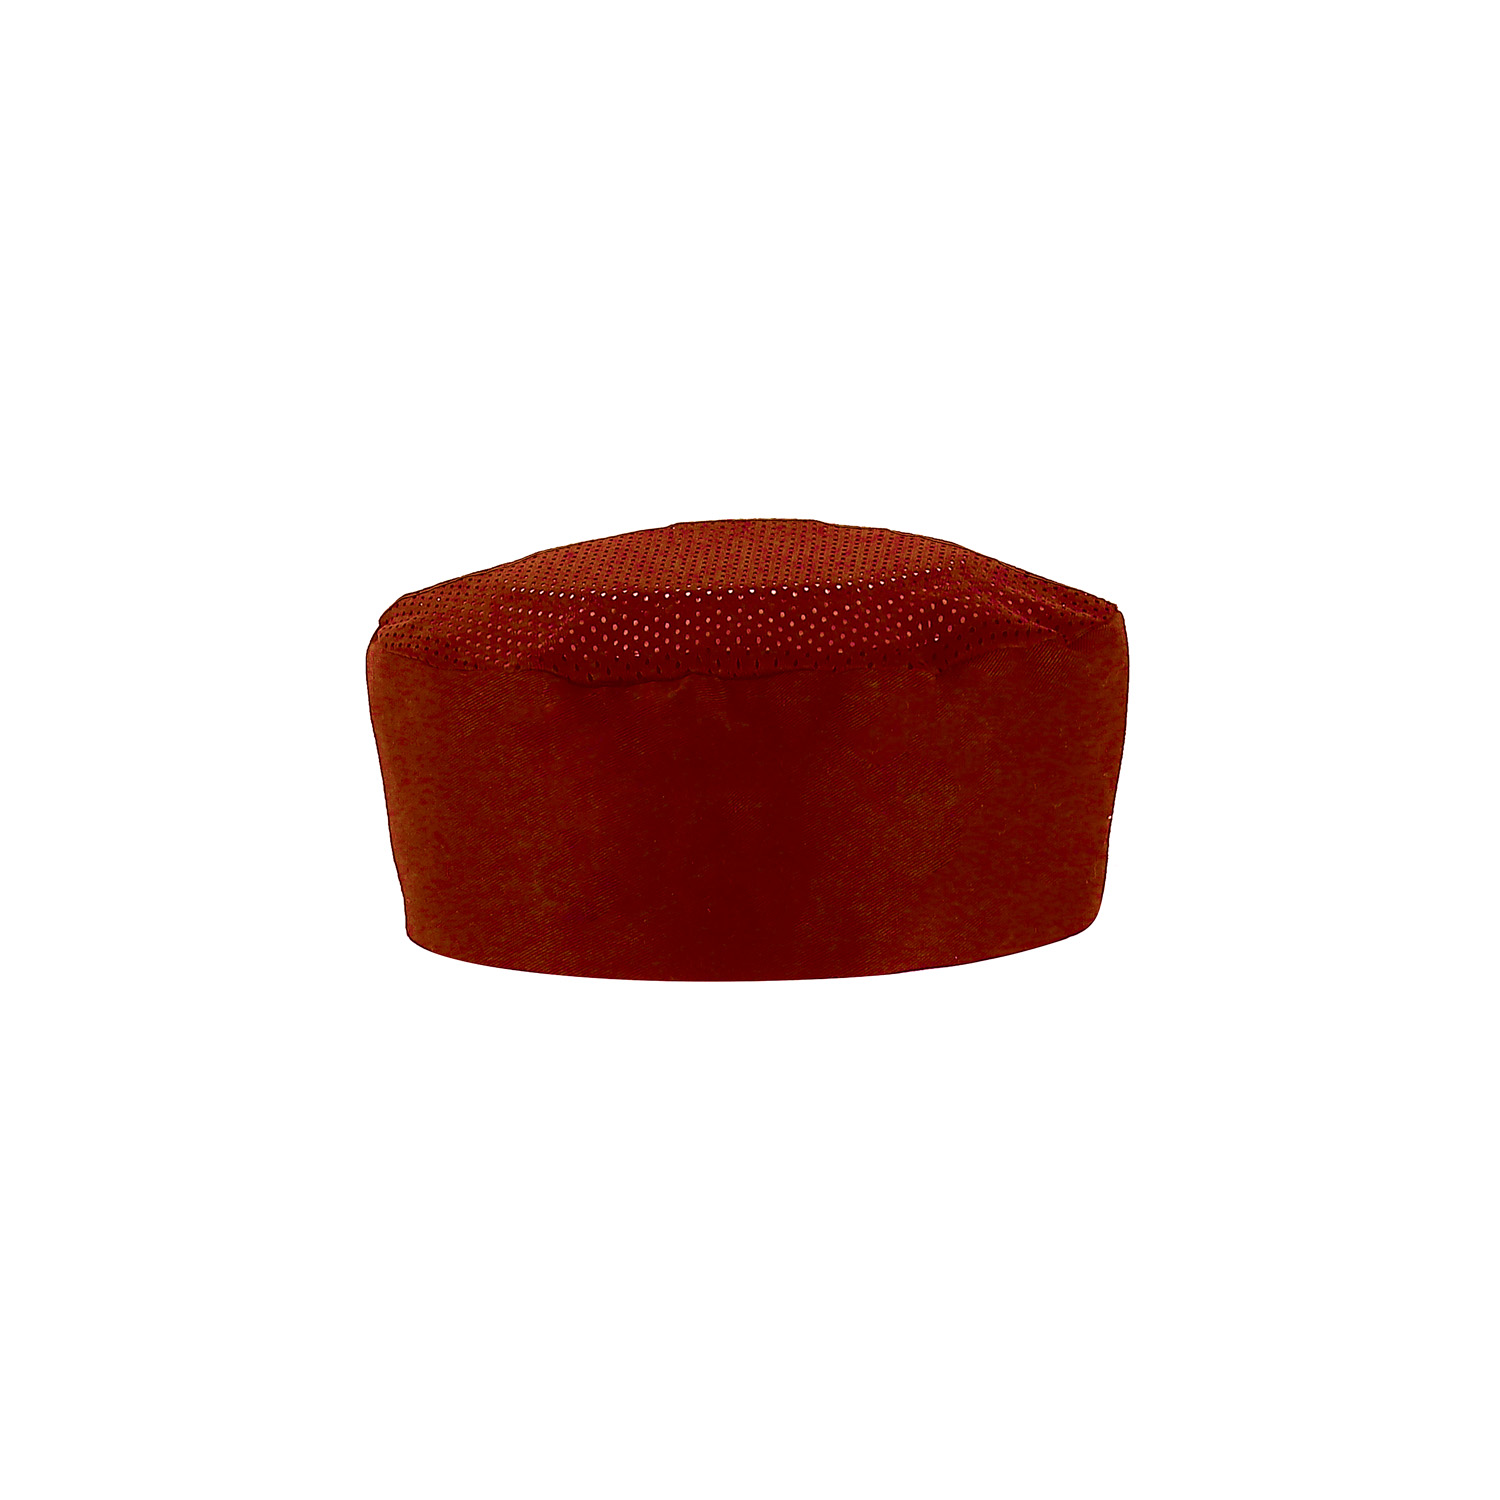 CAC China APHT-1RM Chef's Pride Red Pillbox Hat 3 1/2" H, S/M